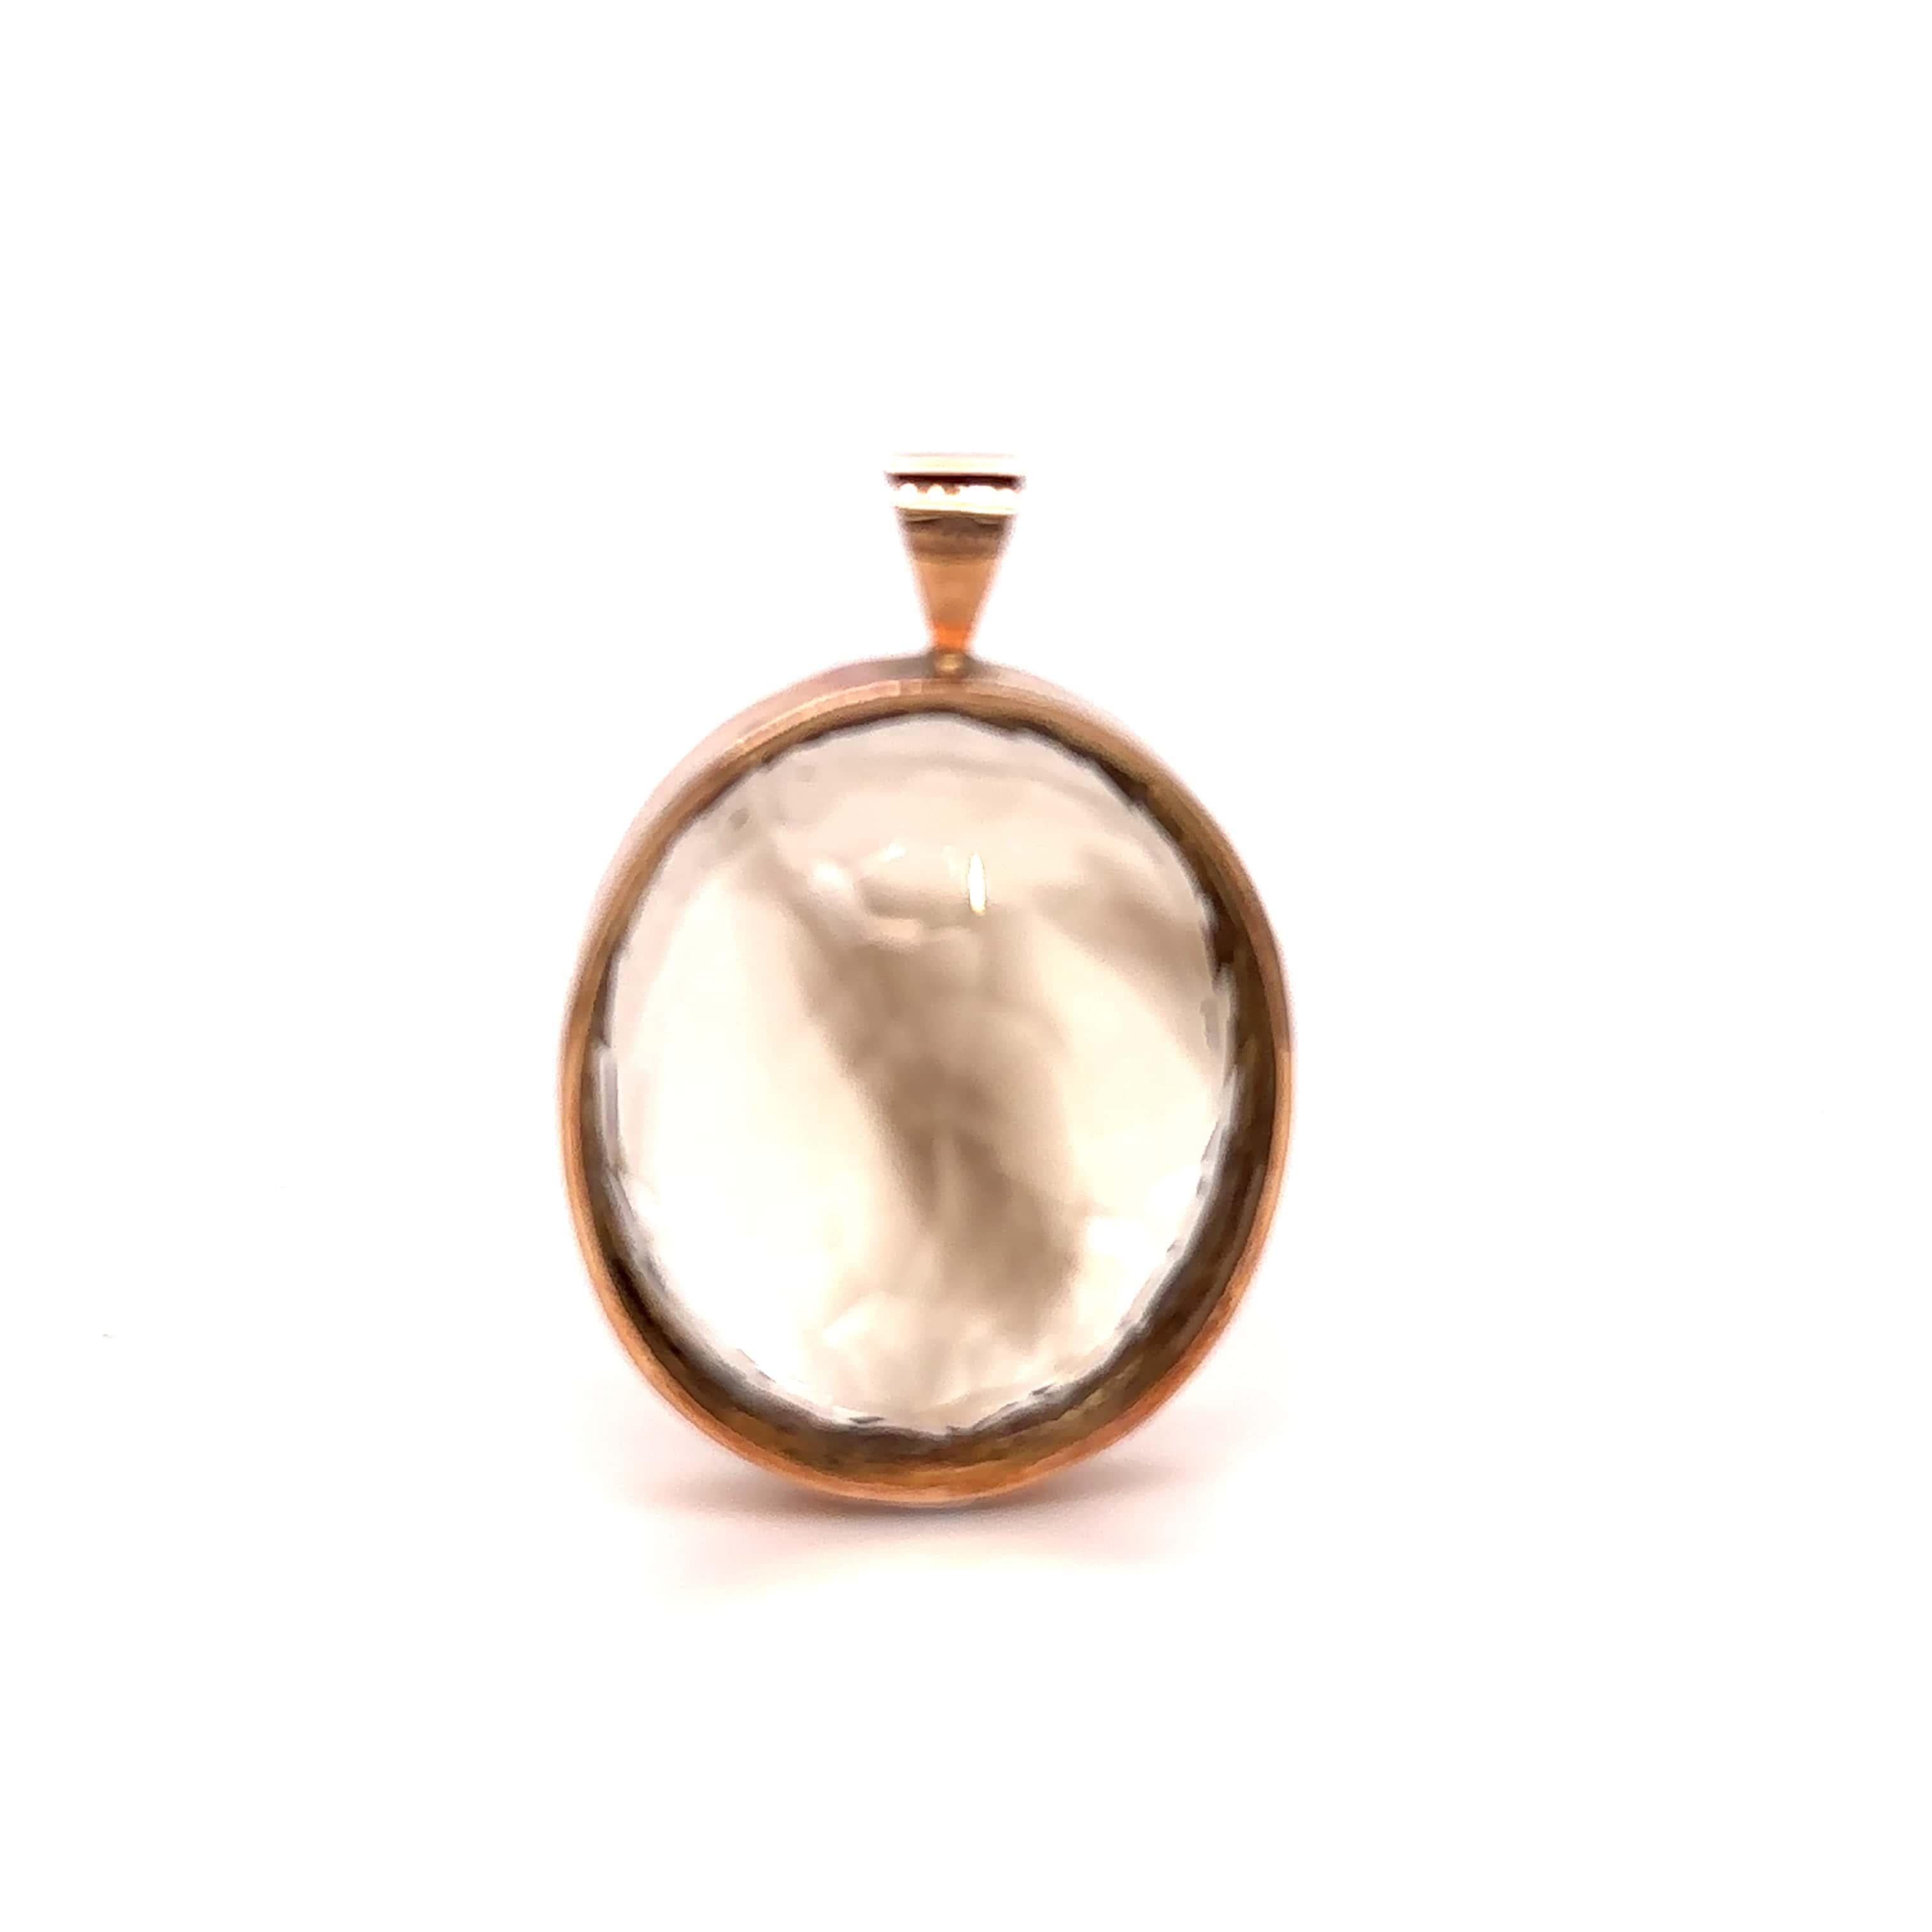 Unique features:

A women's, custom made, pendant

Bespoke Pendant made of 9 kt Rose Gold, in a bezel setting, and weighing 6 gm. Stamped:375. 

Set with a single cushion cut smoky Quartz Gemstone with a weight of 60.00ct. 
Metal: 9ct Rose